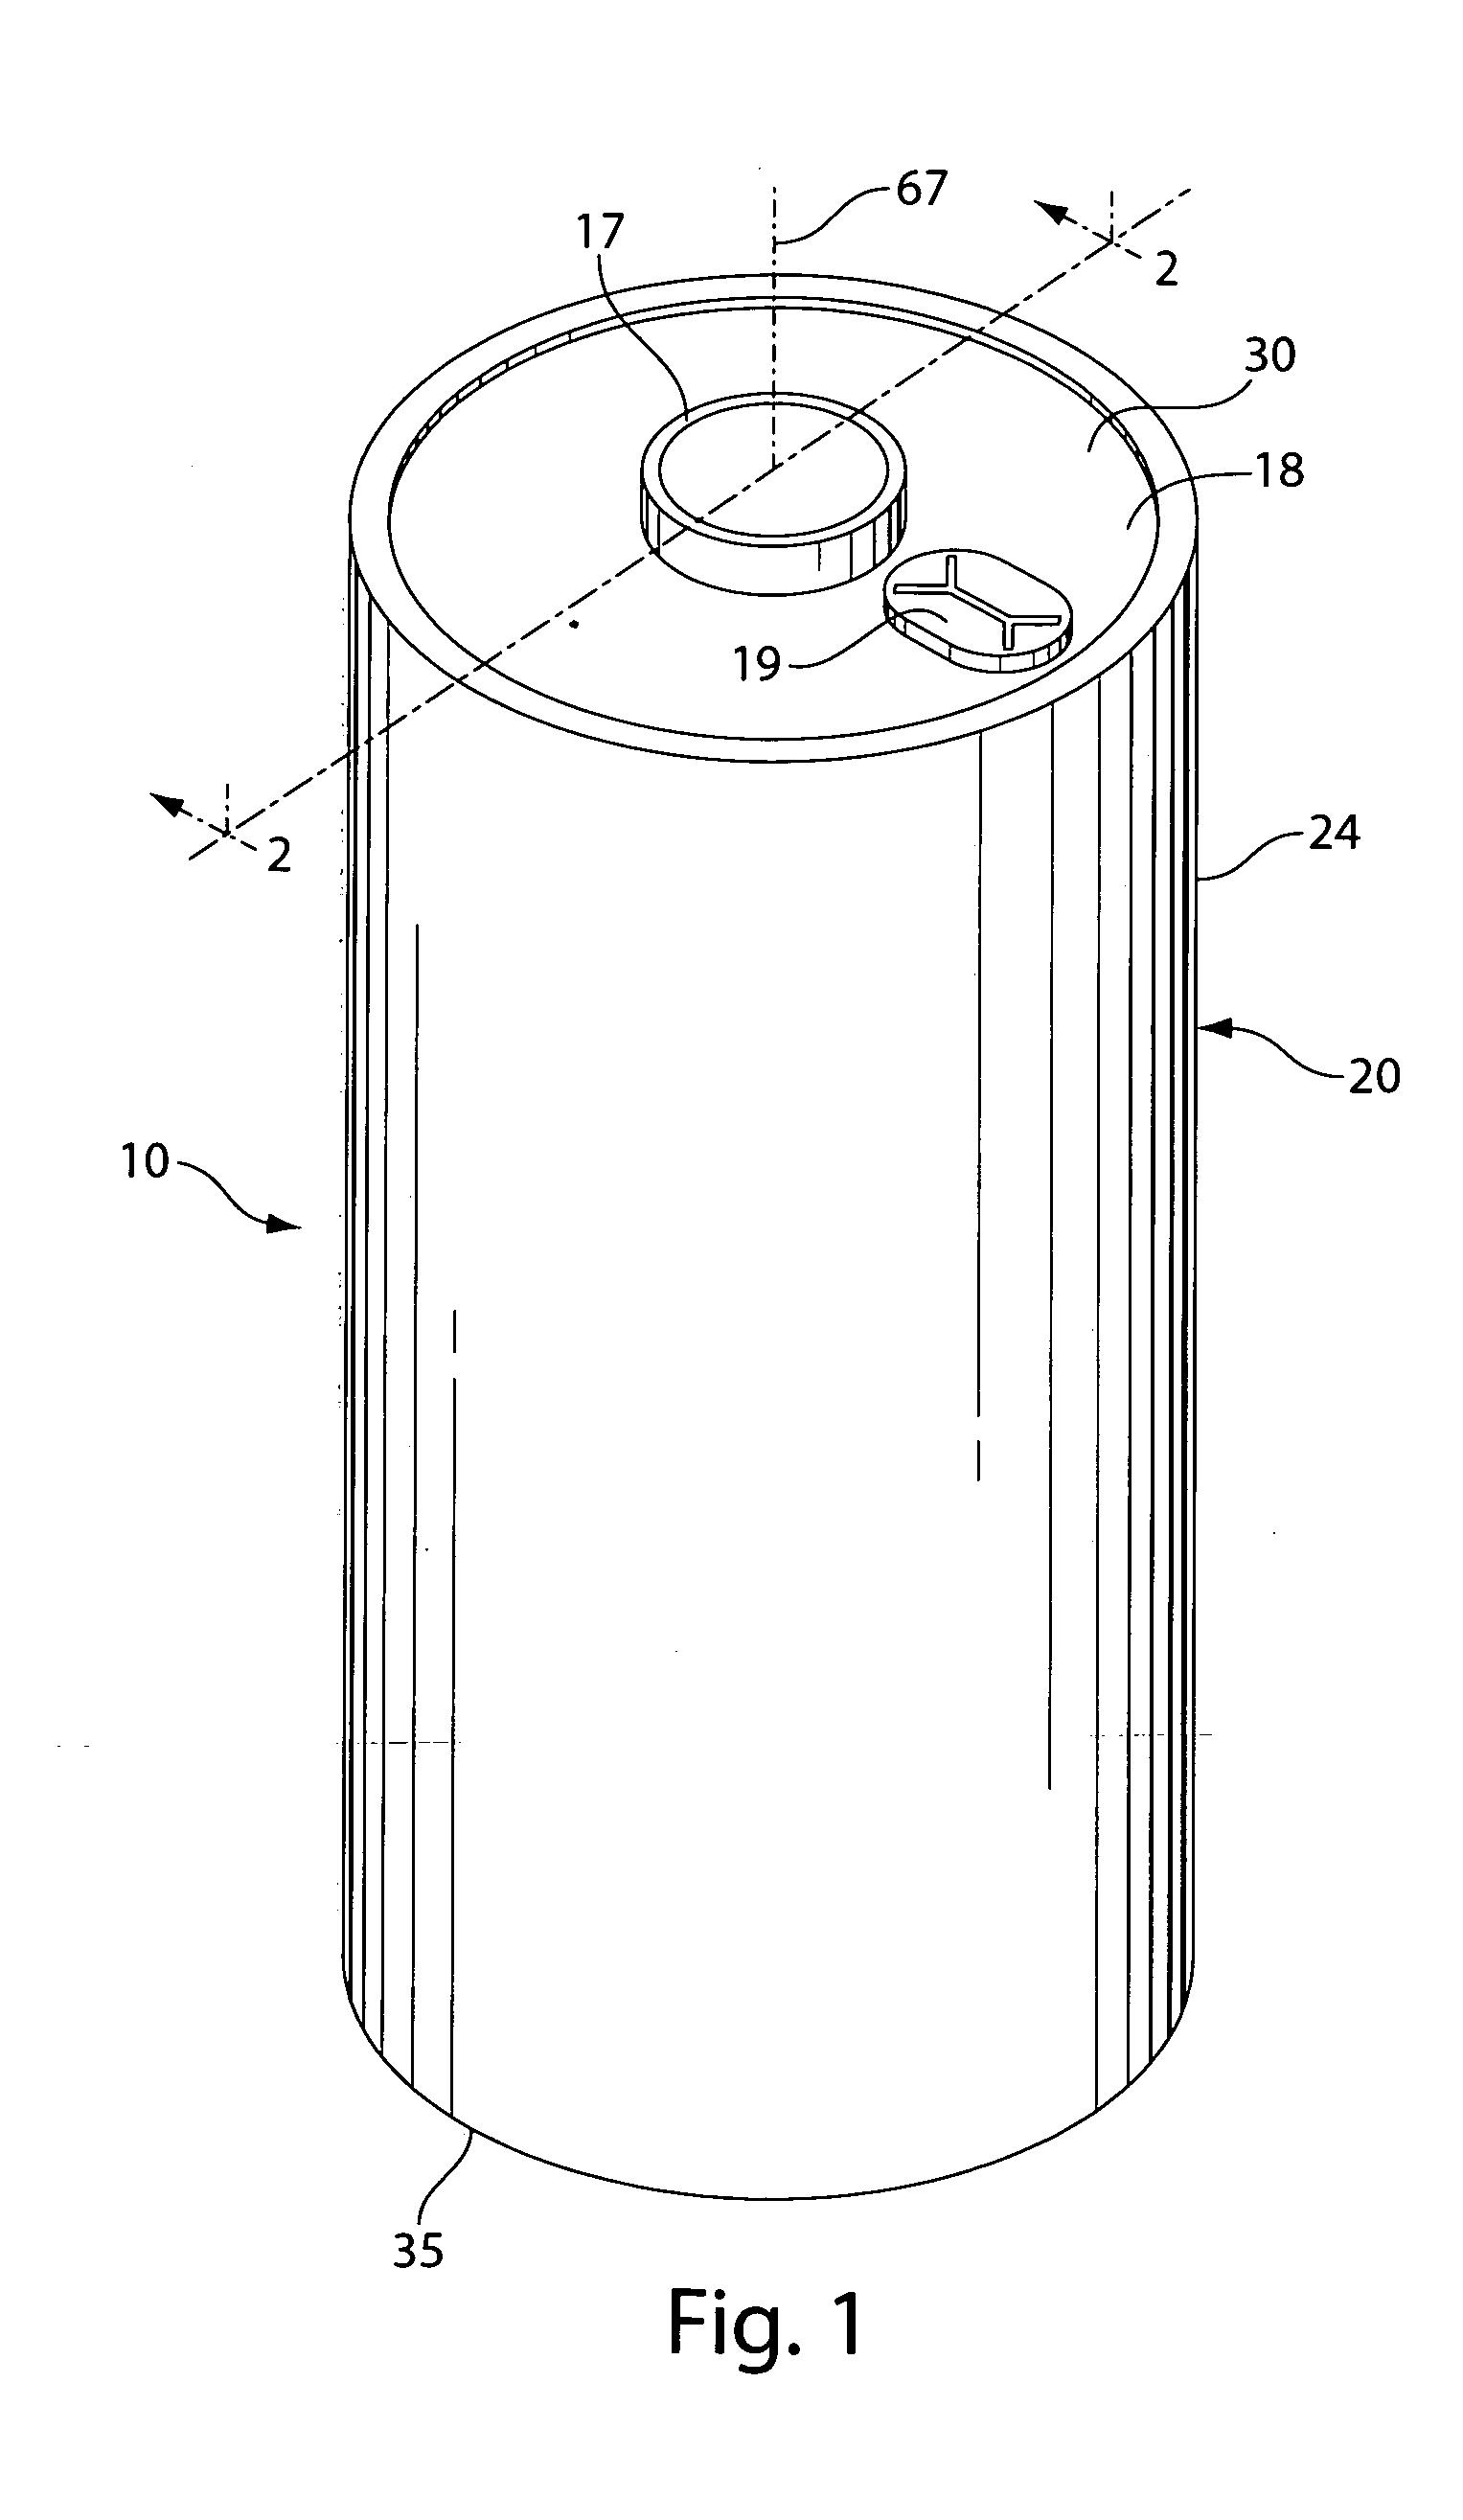 Method of preparing cathode containing Iron disulfide for a lithium cell